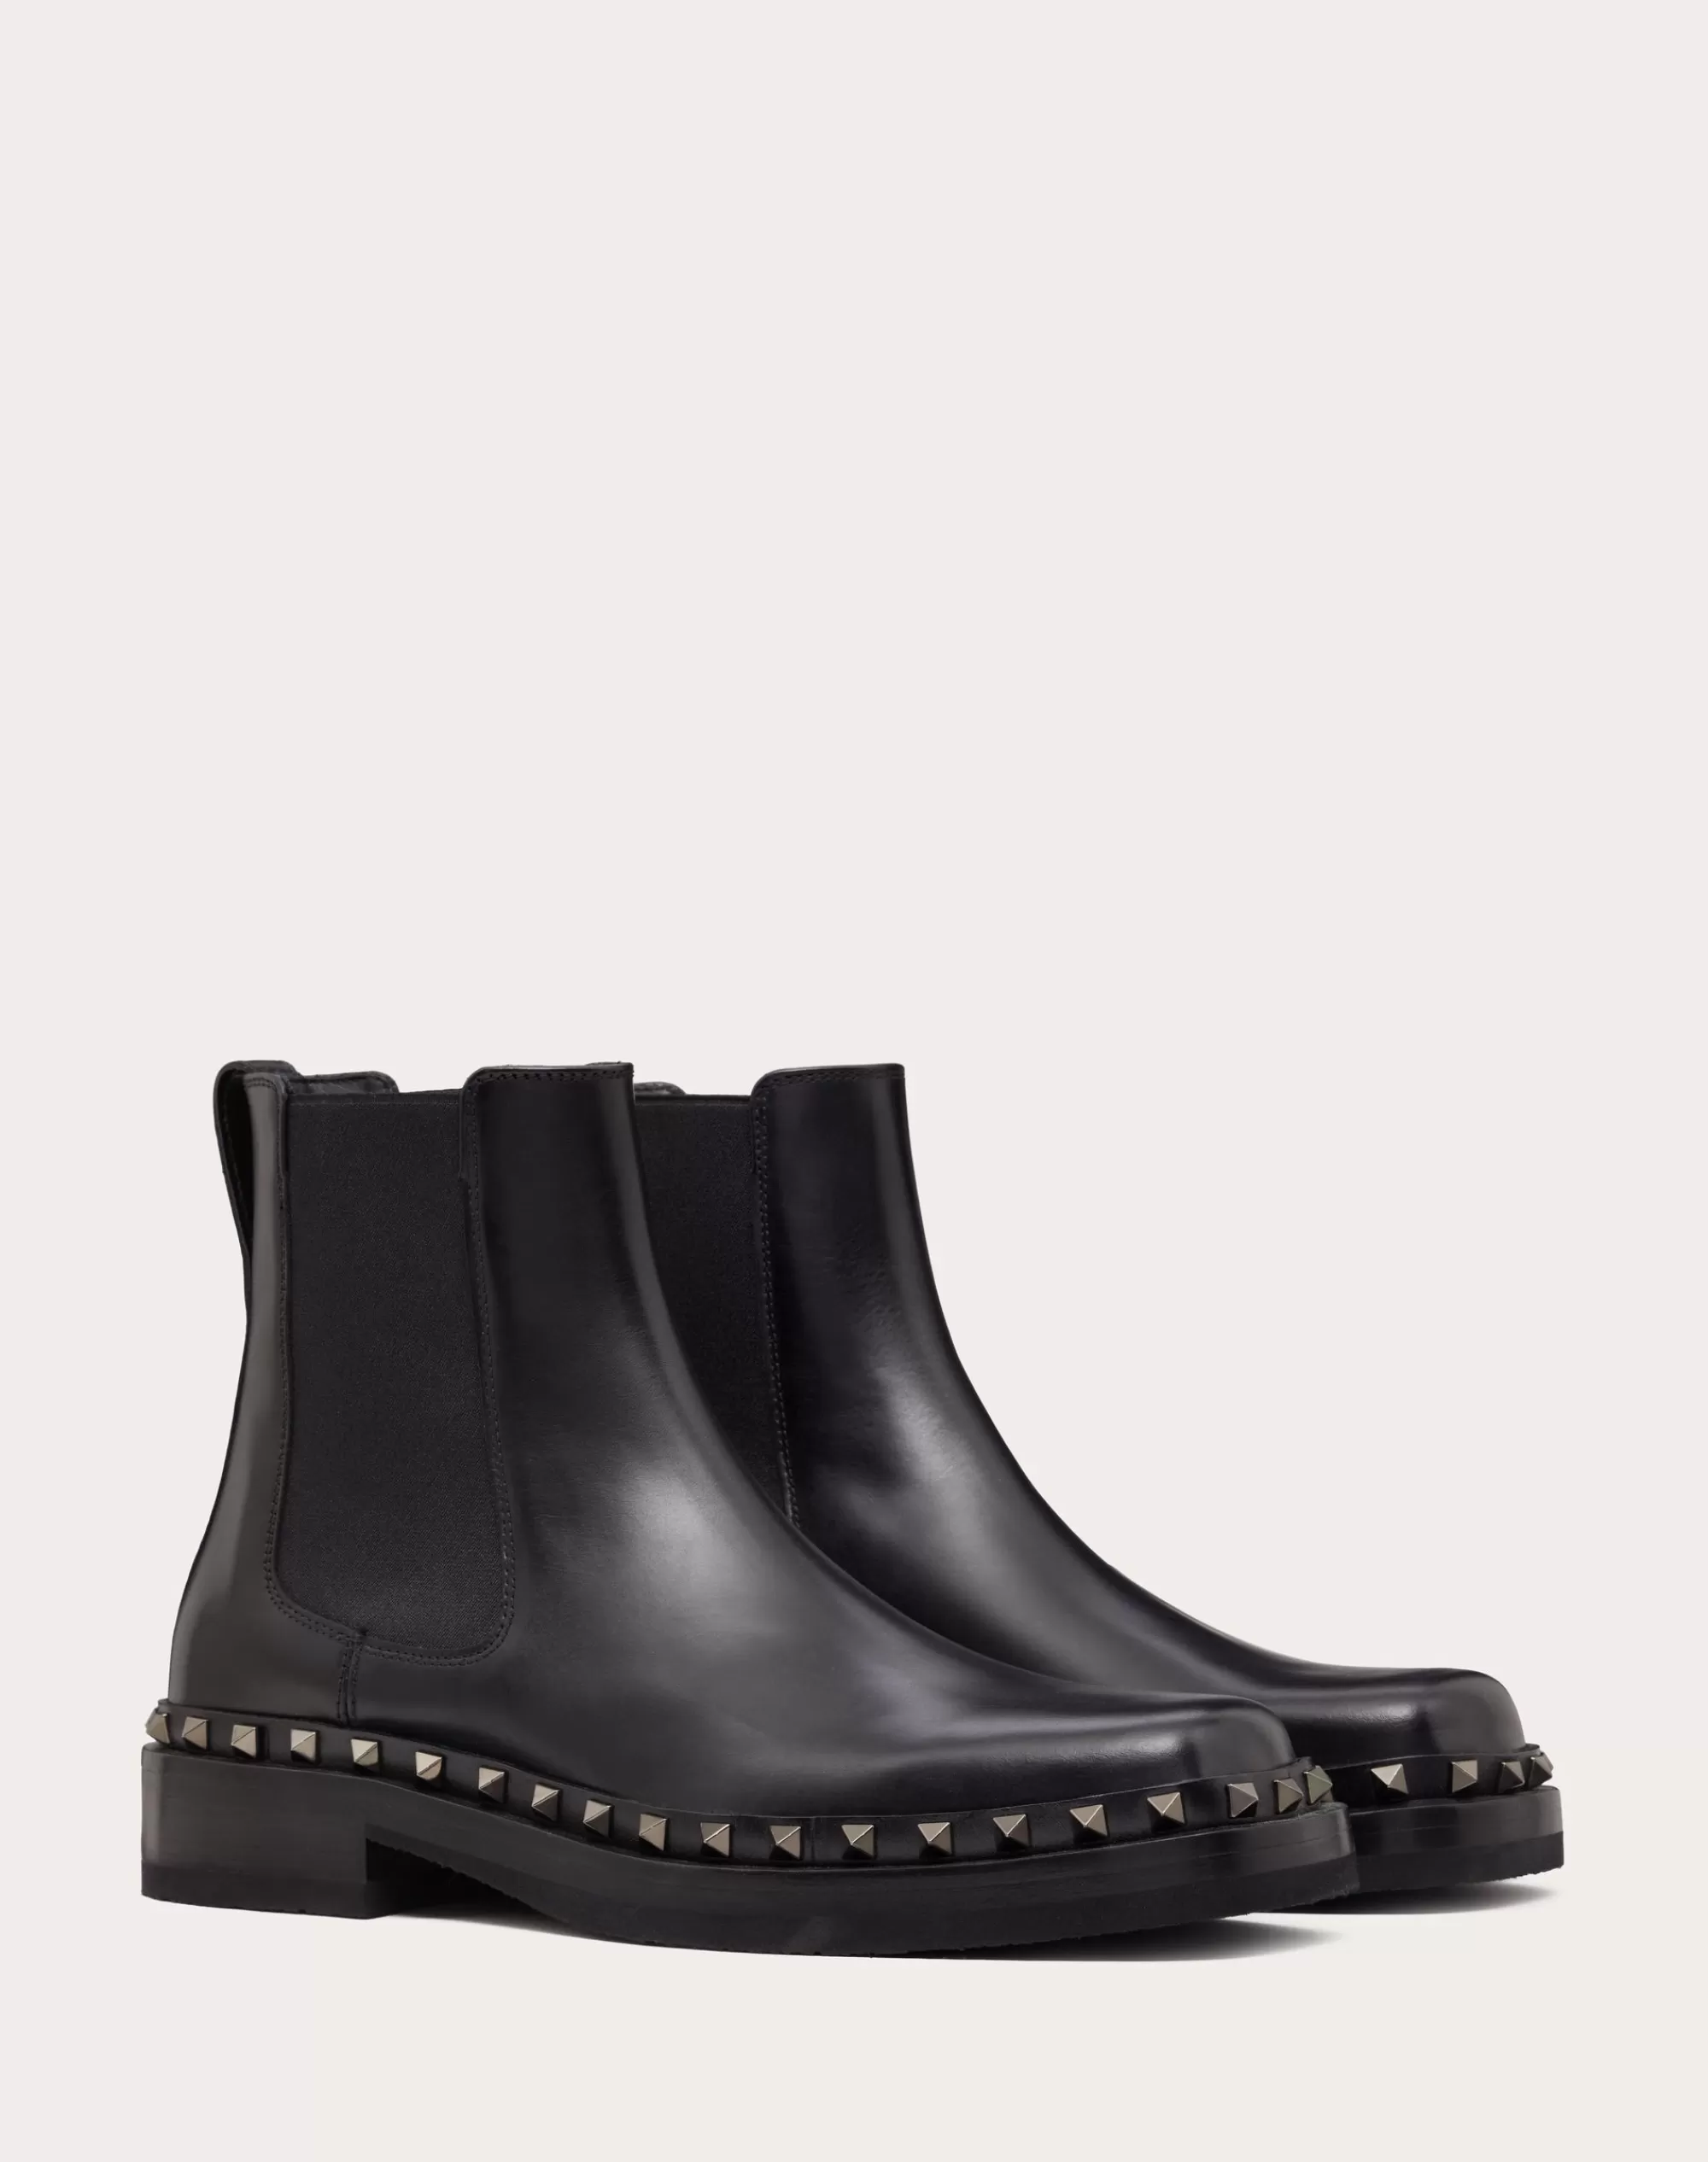 Valentino M-WAY ROCKSTUD ANKLE BOOT IN CALFSKIN LEATHER Black New